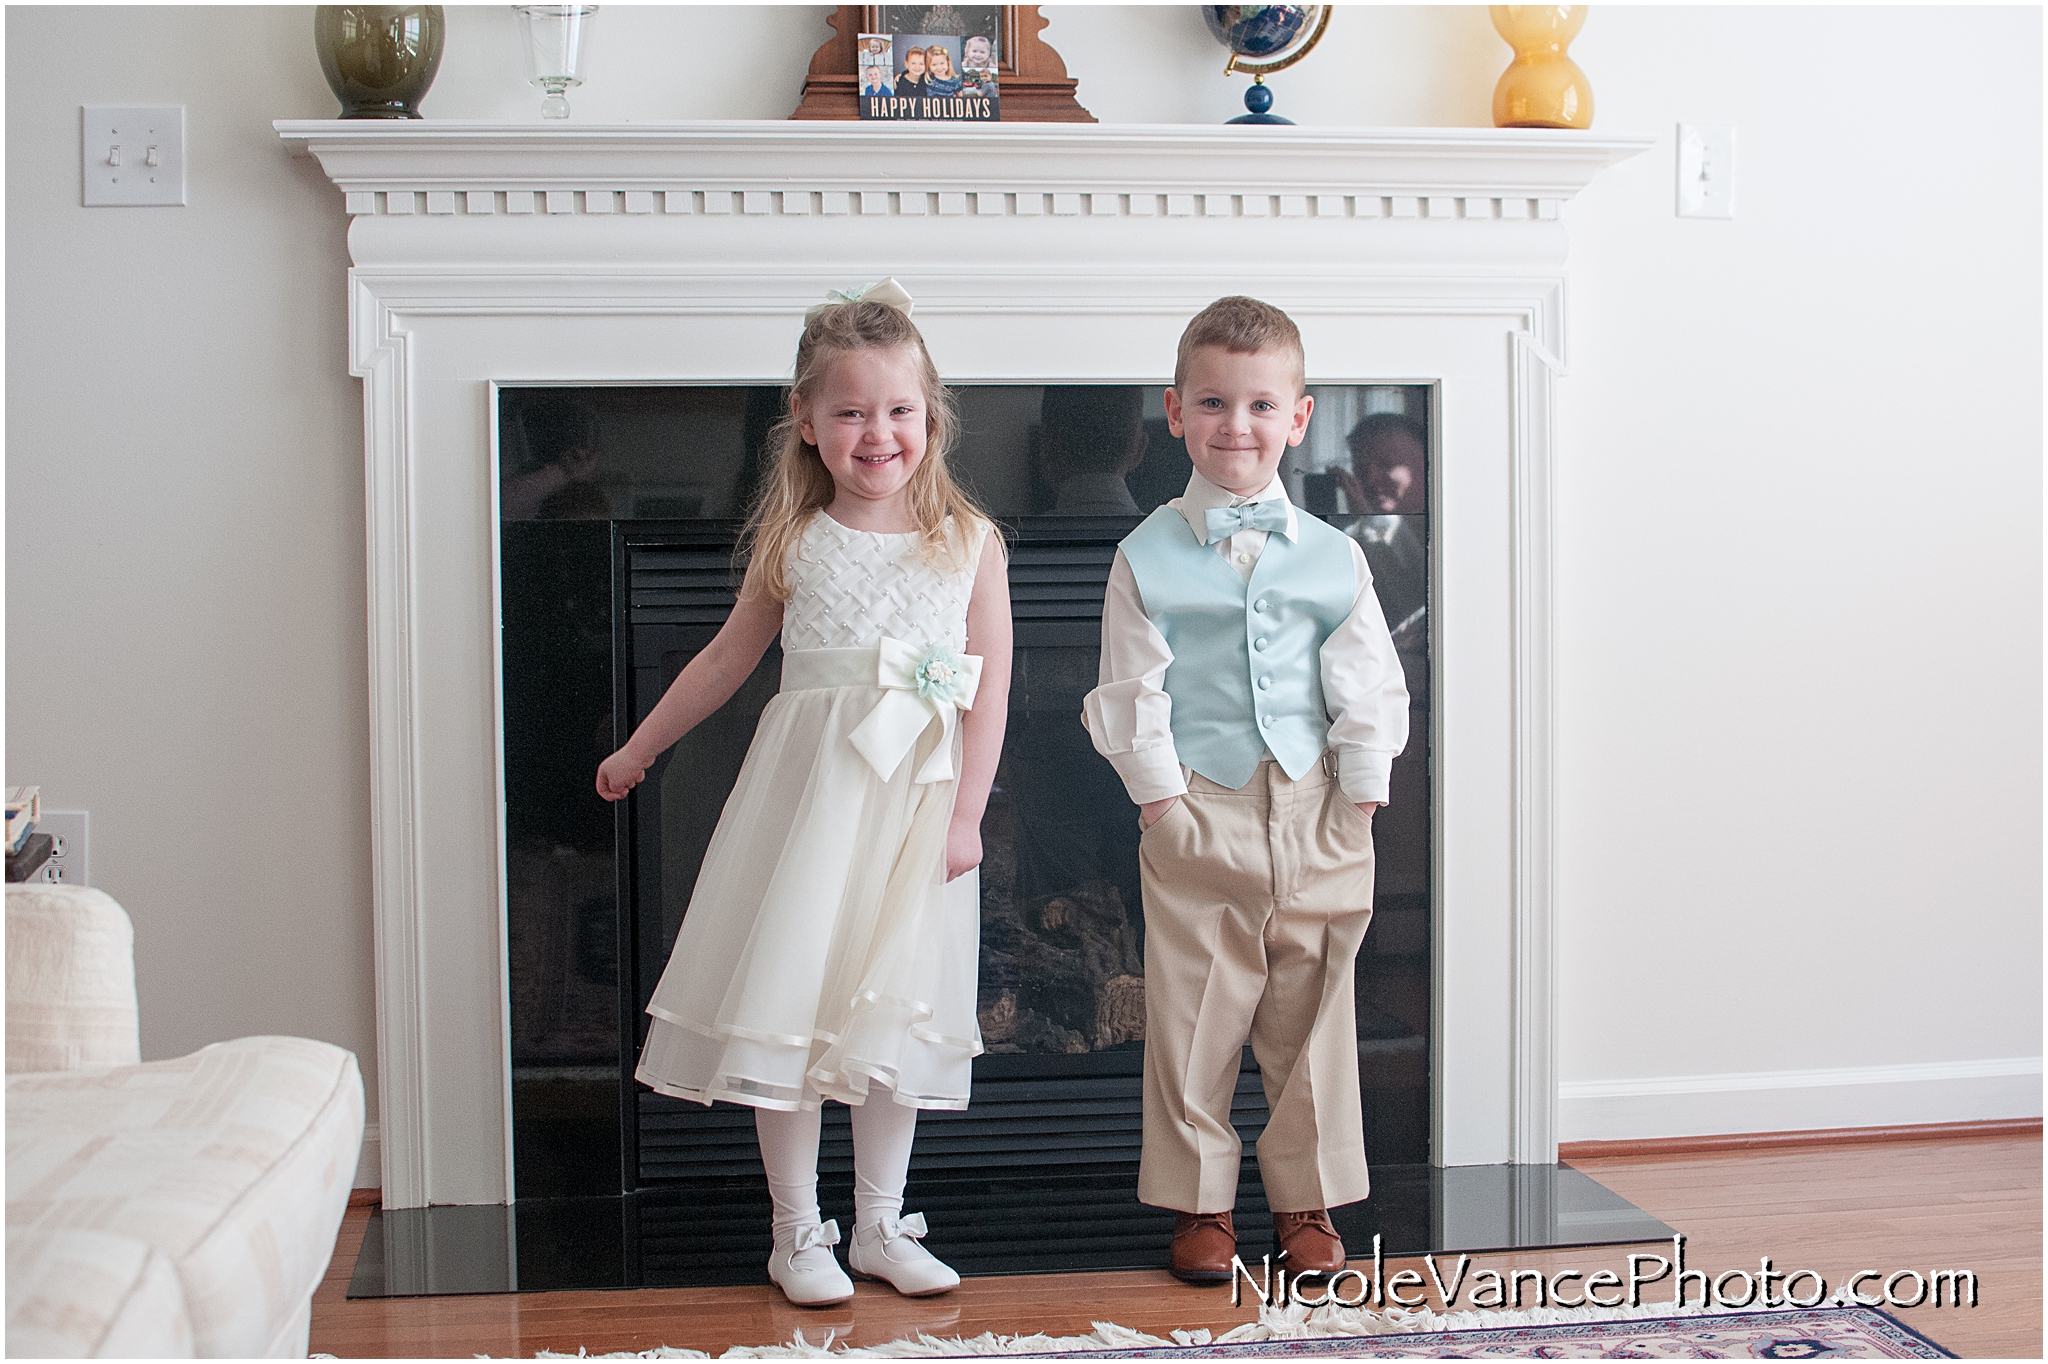 The flower girl and ring bearer are all ready for the wedding!